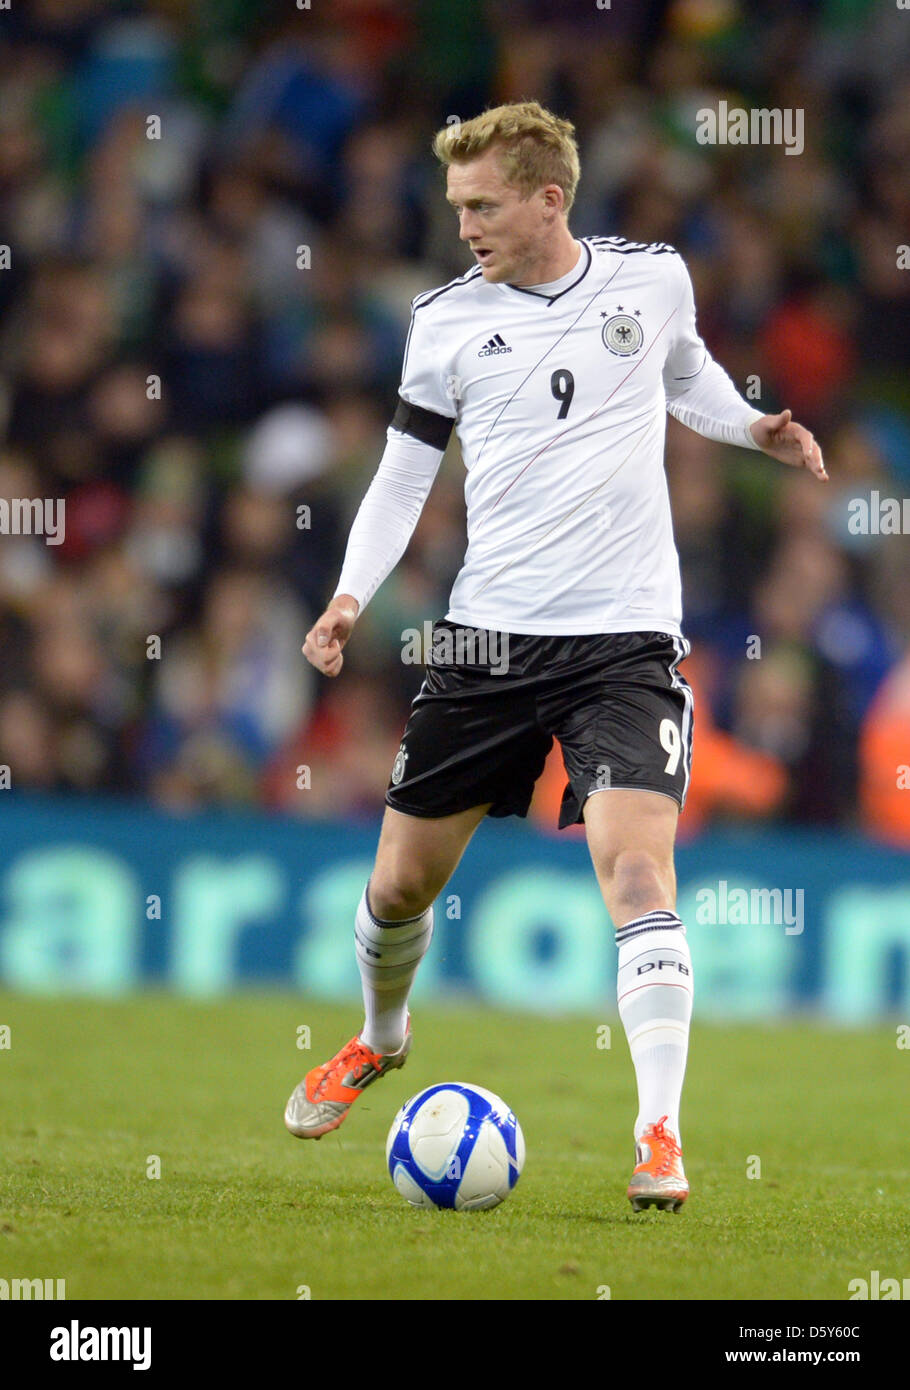 Germany's Andre Schürrle play the ball during the FIFA World Cup 2014 qualifying soccer match between Ireland and Germany at Aviva stadium in Dublin, Ireland, 12 October 2012. The game ended 1:6. Photo: Federico Gambarini/dpa Stock Photo